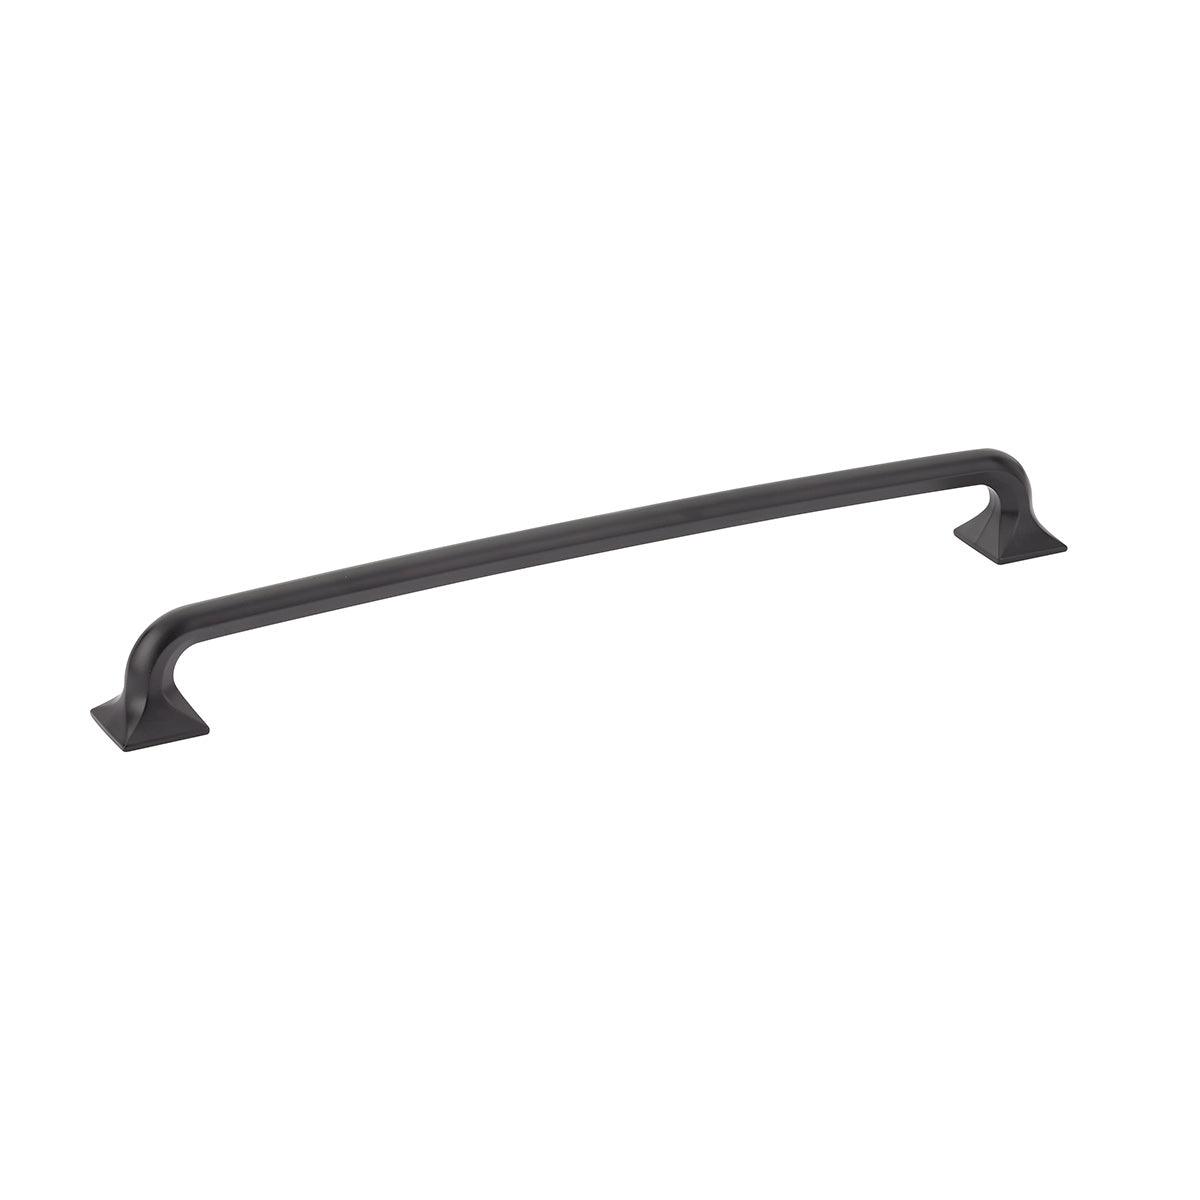 Schaub - Northport Square Base Appliance Pull - 218-MB | Montreal Lighting & Hardware